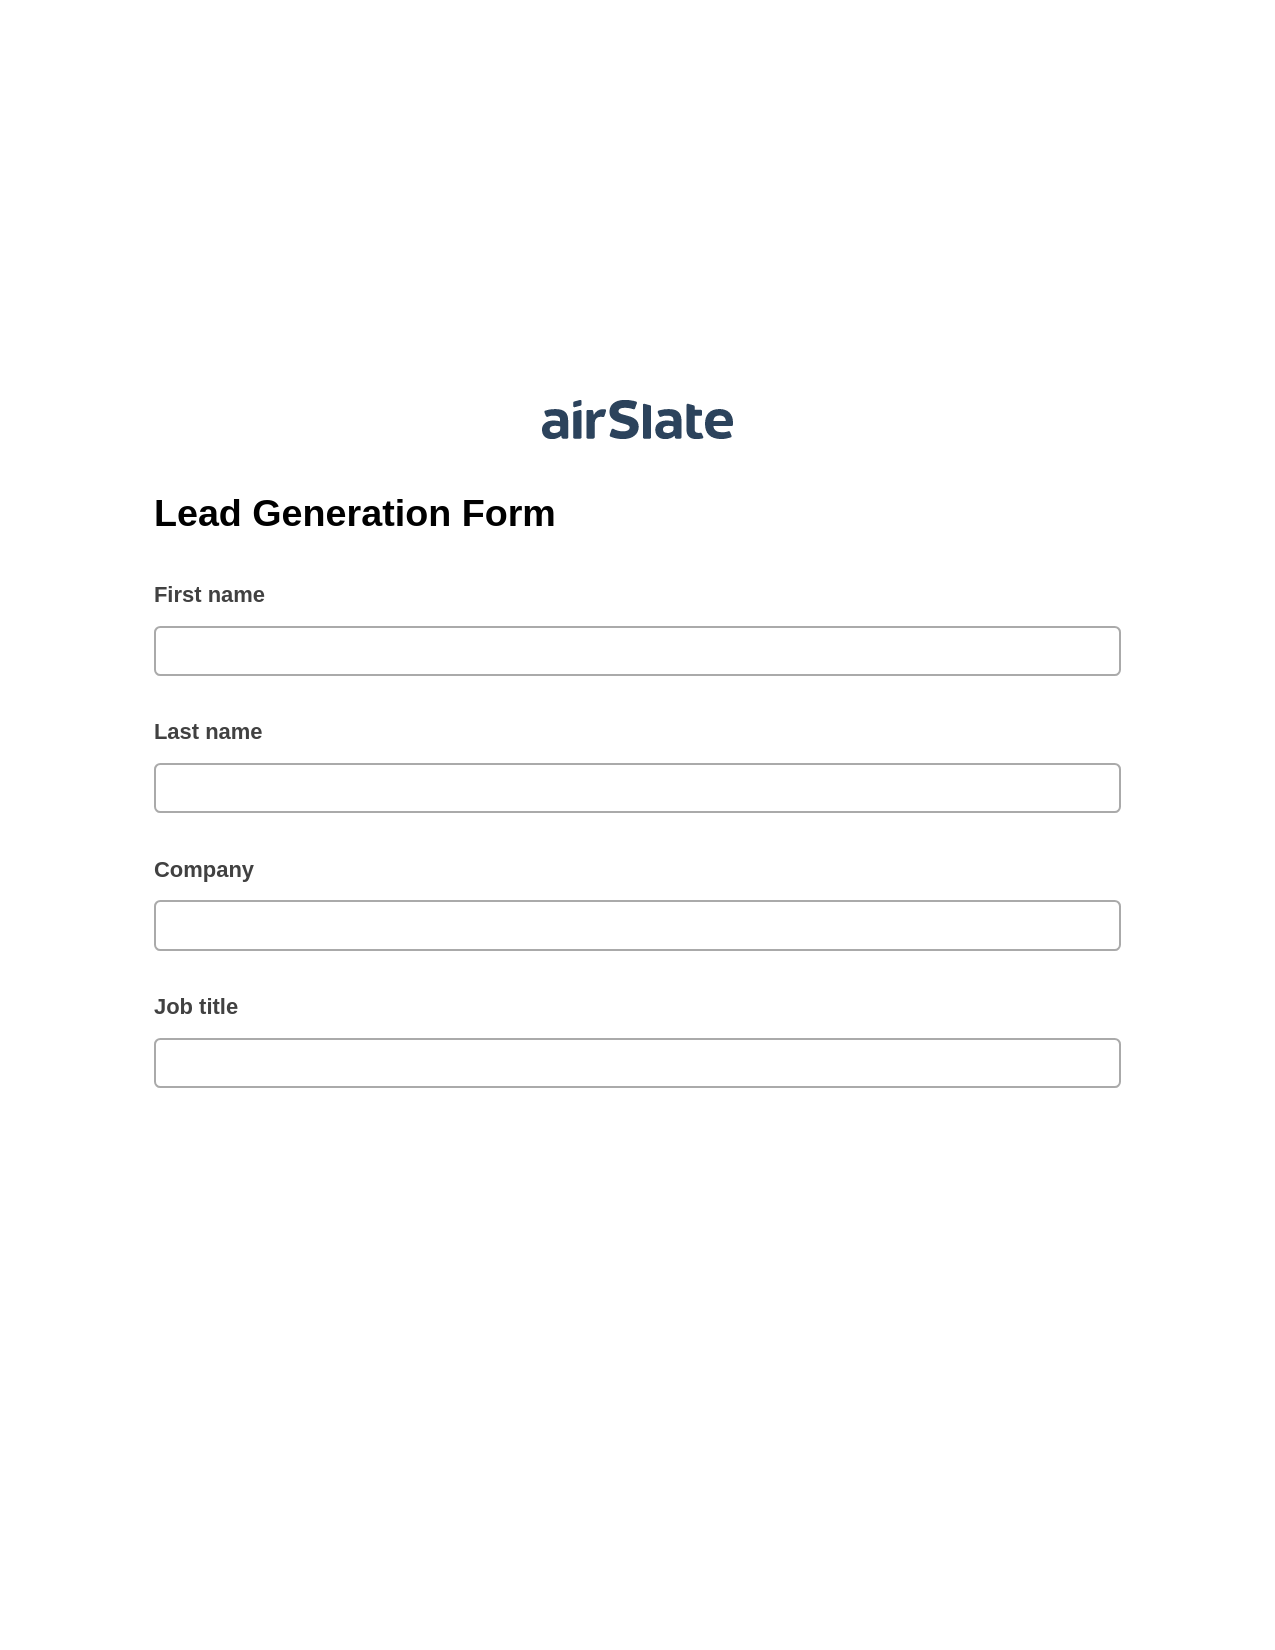 Lead Generation Form Pre-fill Dropdowns from Airtable, Send Mailchimp Campaign Bot, Export to Excel 365 Bot